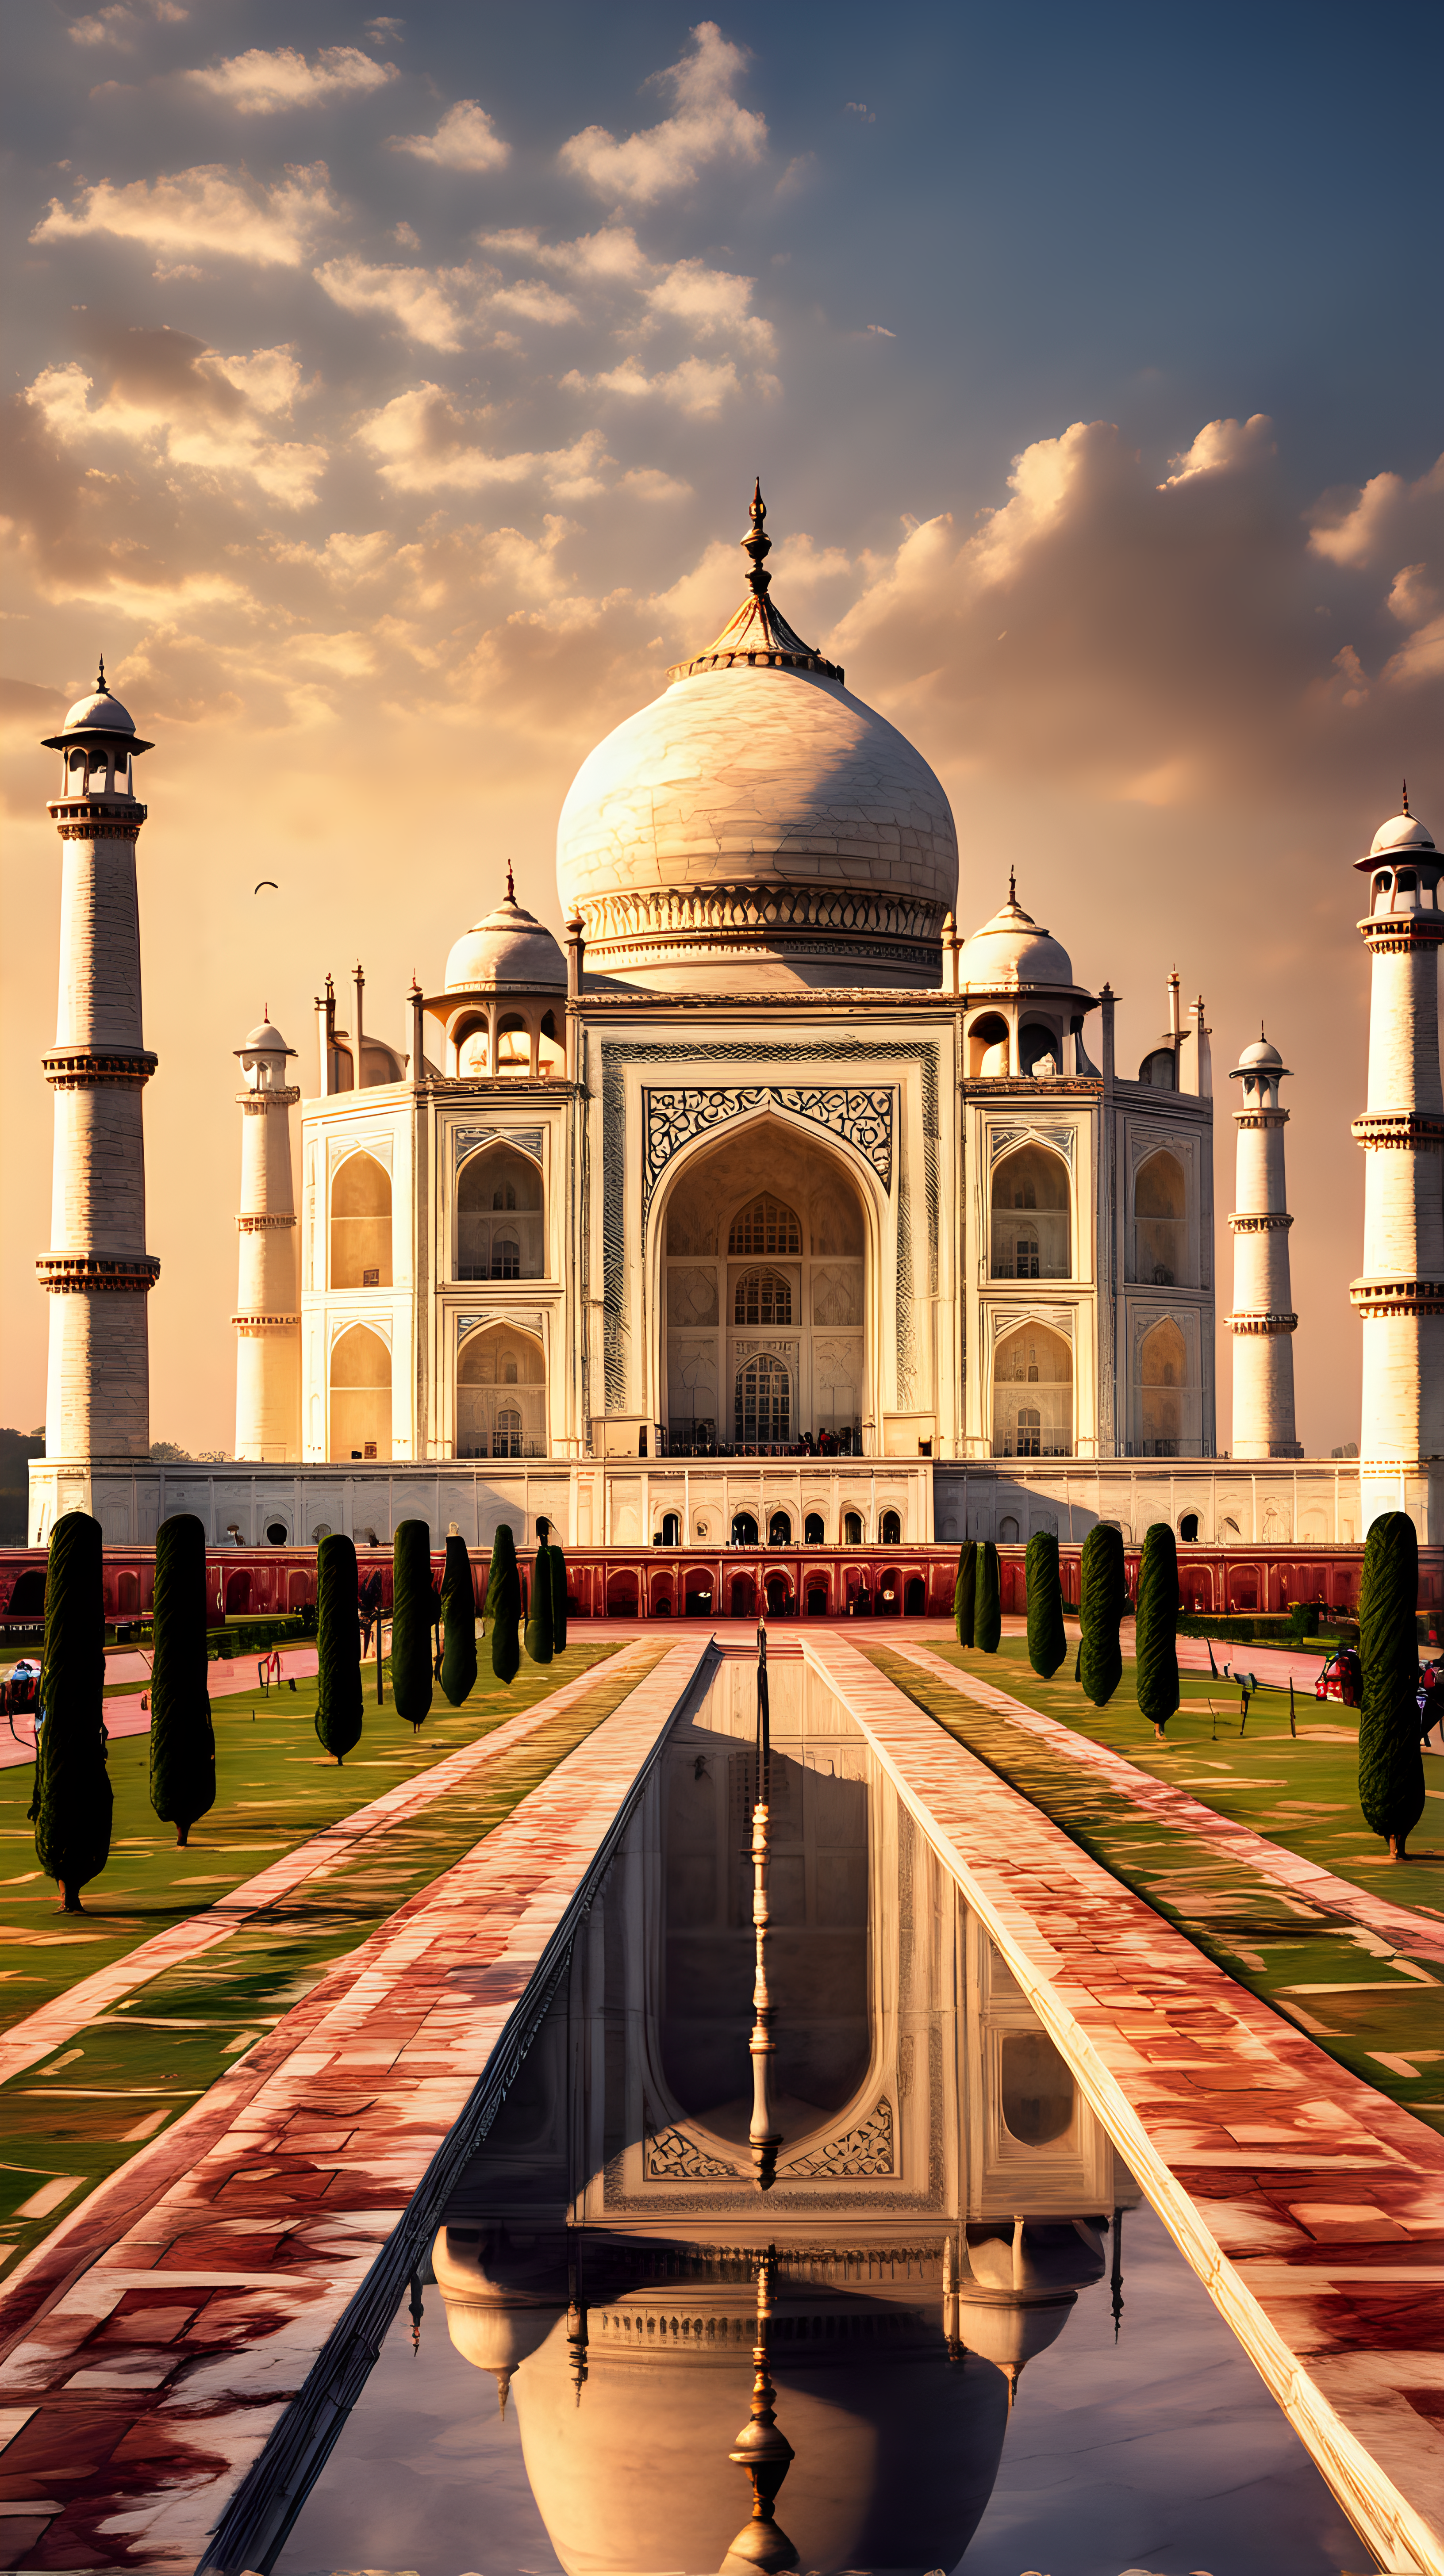 Imagine we're prompting, an engaging trivia background highlighting the beauty of the Taj Mahal. Capture the mesmerizing details of this renowned world wonder with a high-quality camera model and lens. Illuminate the scene with balanced and natural lighting, ensuring a universally usable and visually appealing composition for a captivating geography trivia backdrop.